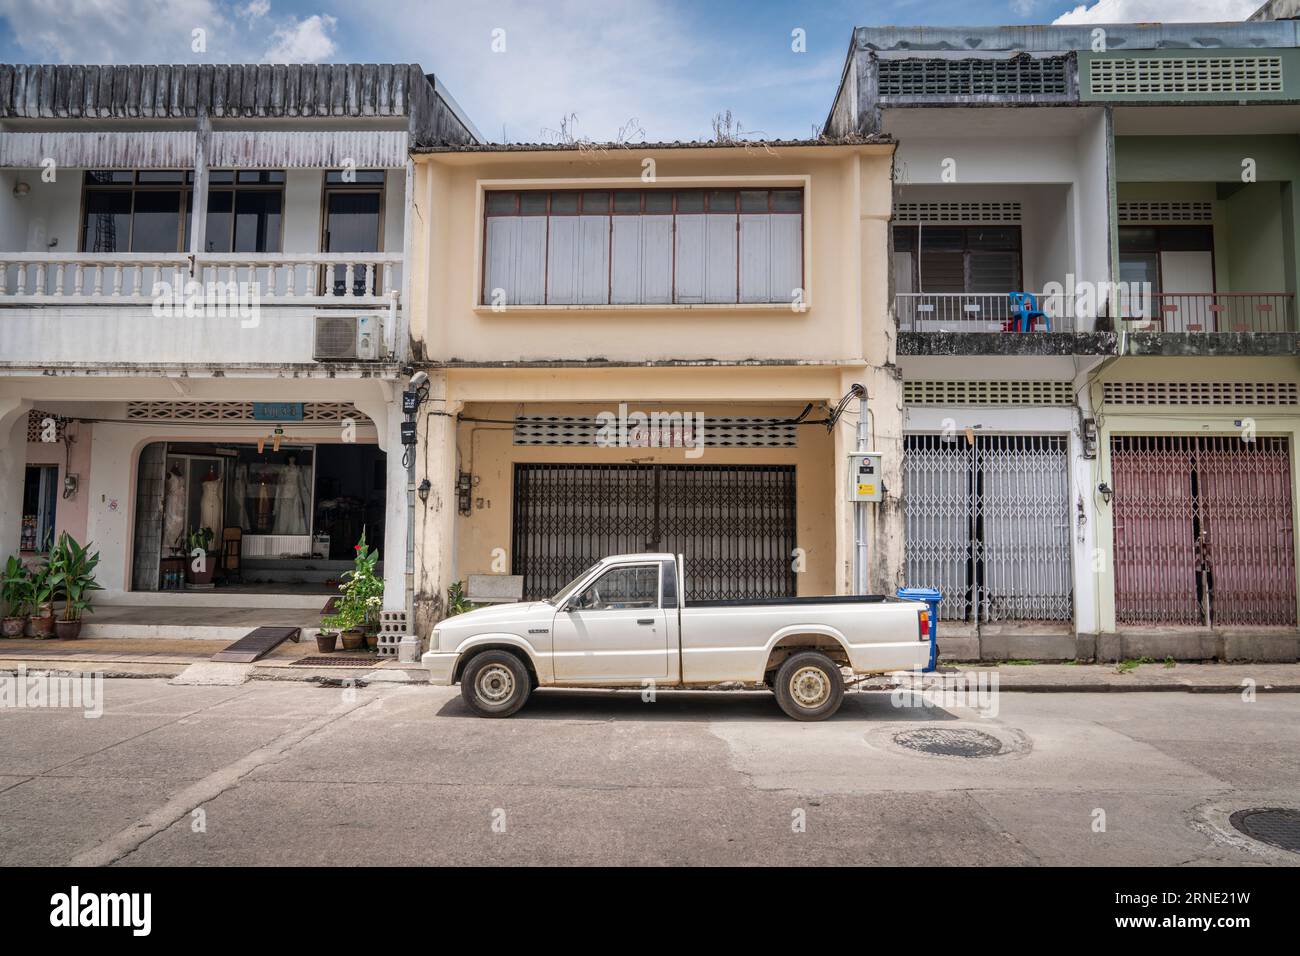 Architecture in Takua Pa. An old pickup truck on the background of buildings in the Chinese-Portuguese style. Takua Pa Thailand, Phang Nga March 2, 20 Stock Photo